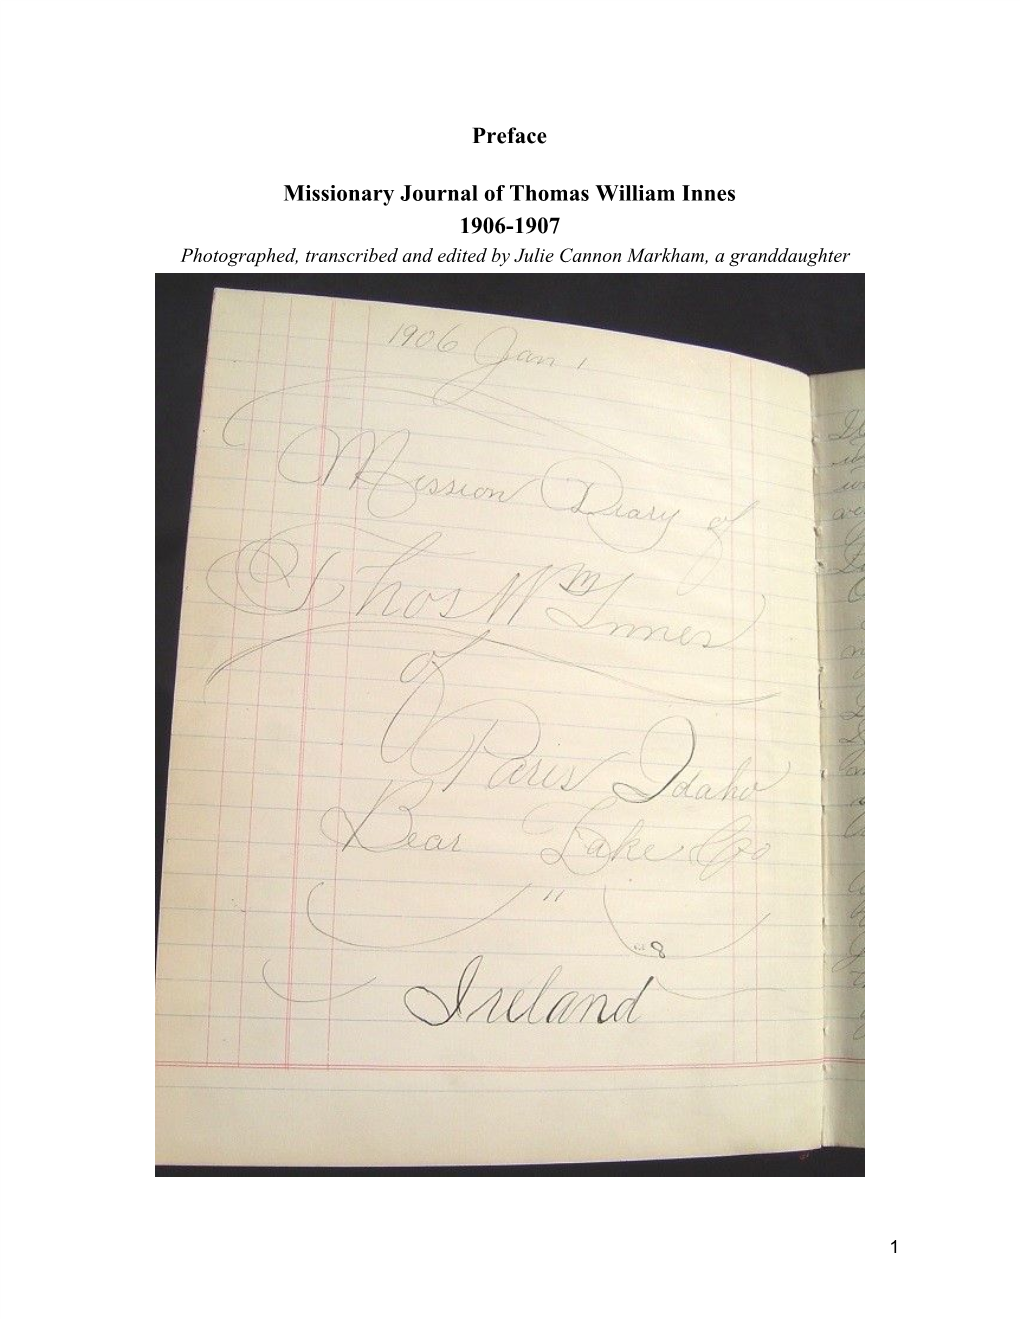 Missionary Journal of Thomas William Innes 1906-1907 Photographed, Transcribed and Edited by Julie Cannon Markham, a Granddaughter